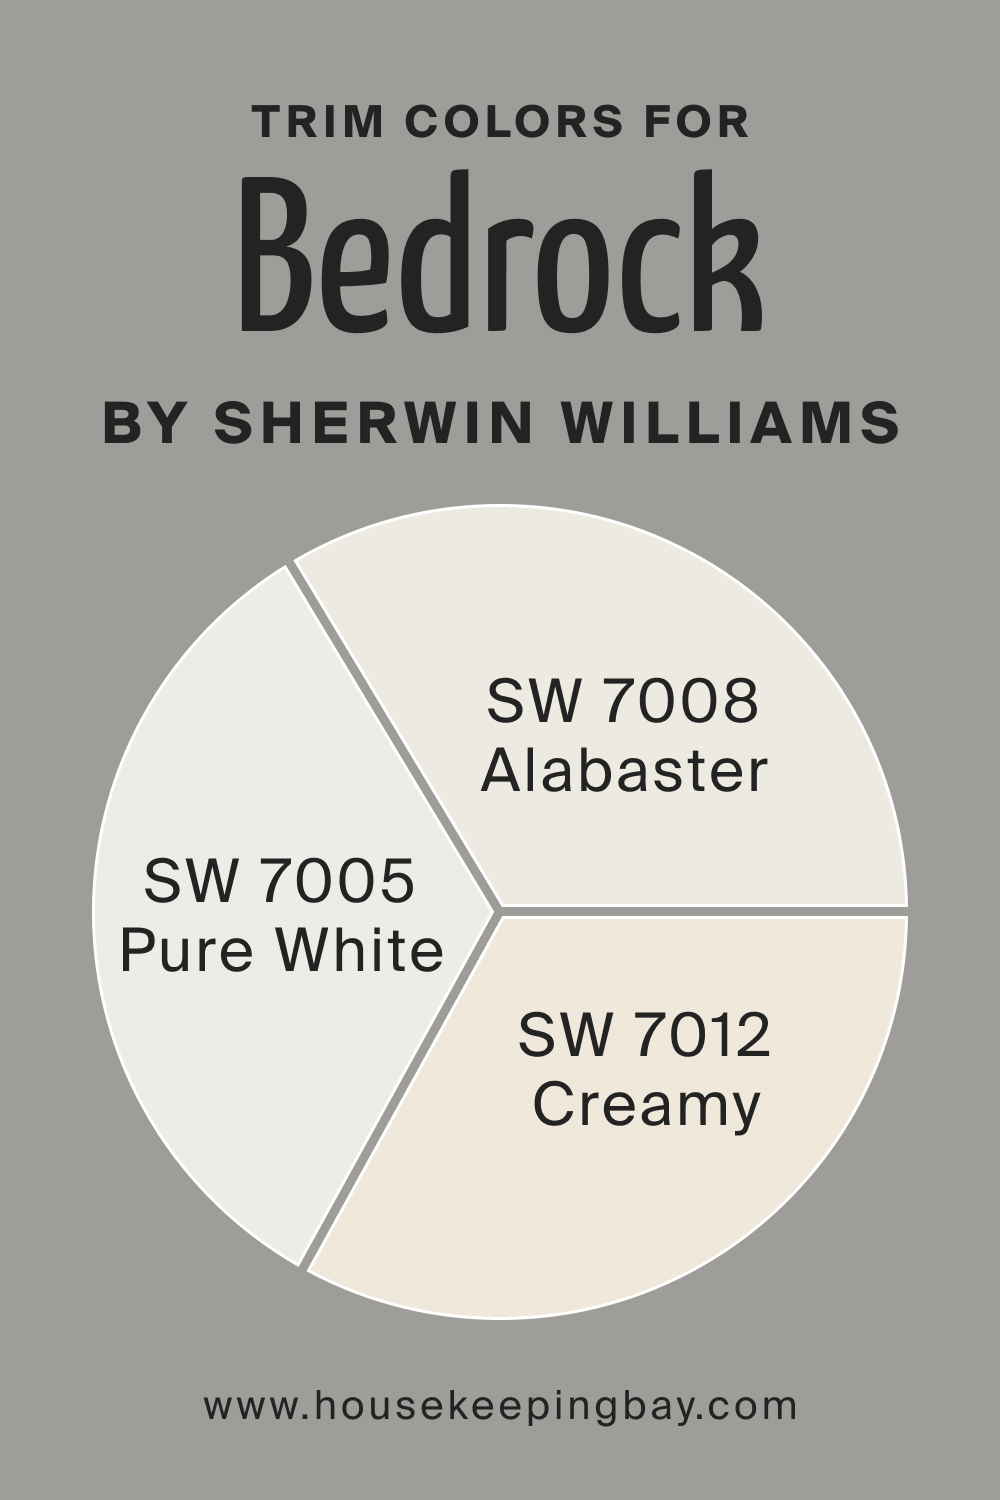 Trim Colors of SW 9563 Bedrock by Sherwin Williams